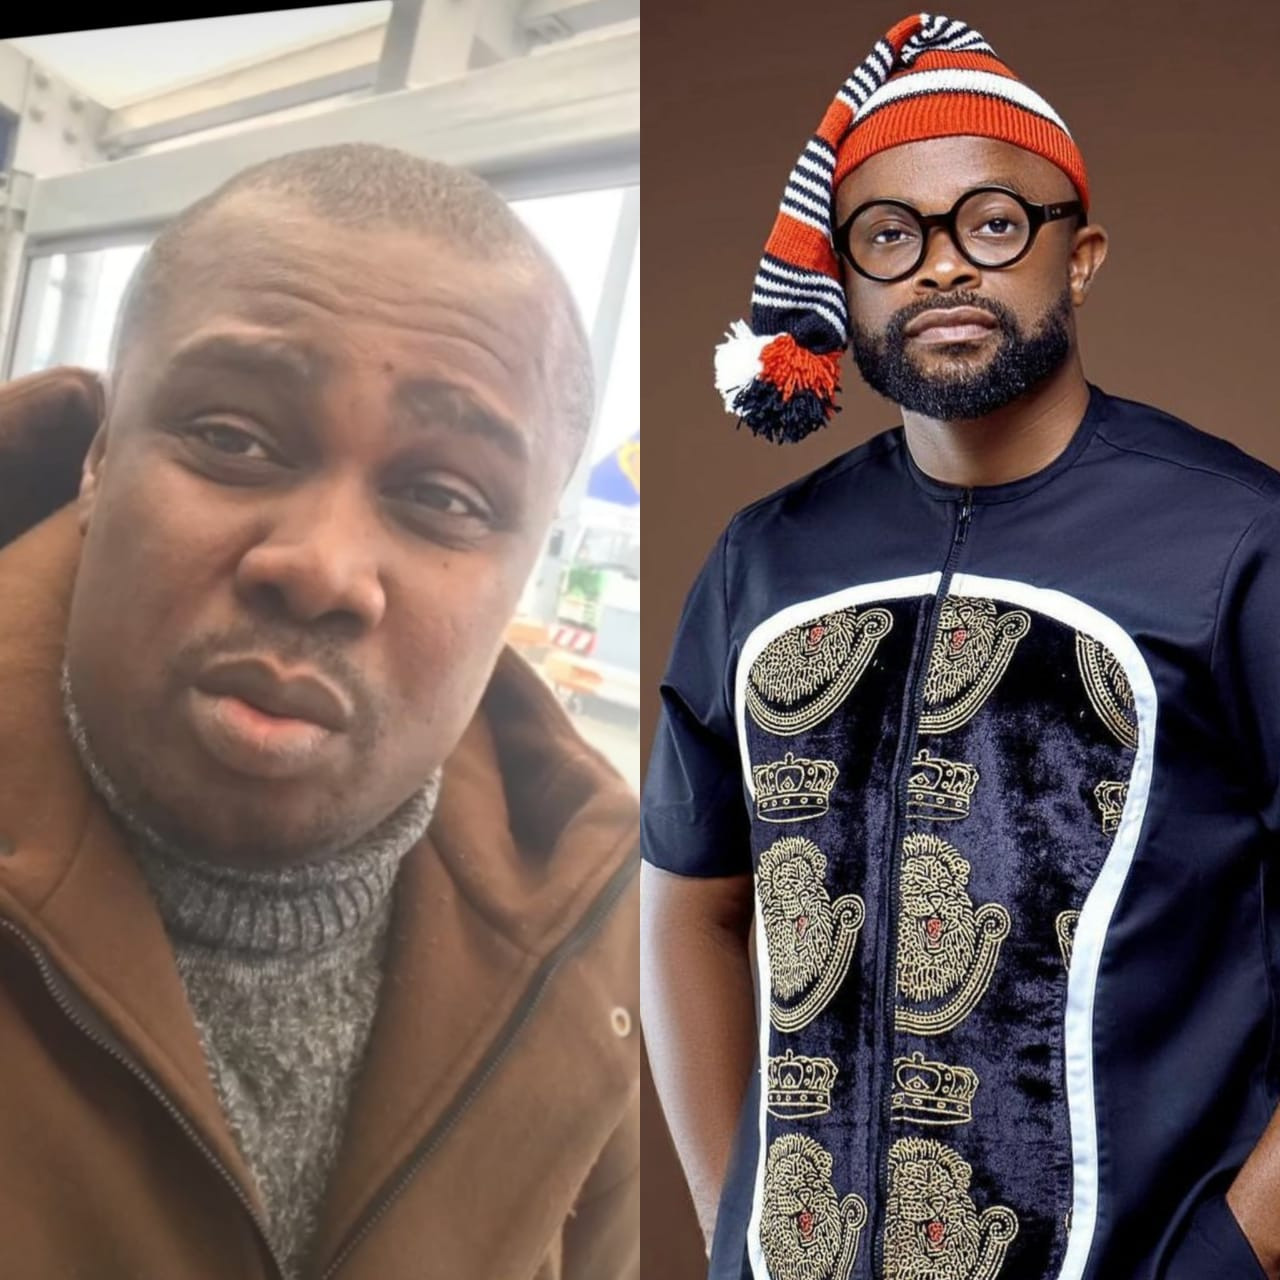 Okon Lagos Clashes With Frank Ufomadu Over Comments He Made About Comedians Who Charge N5m For Tables